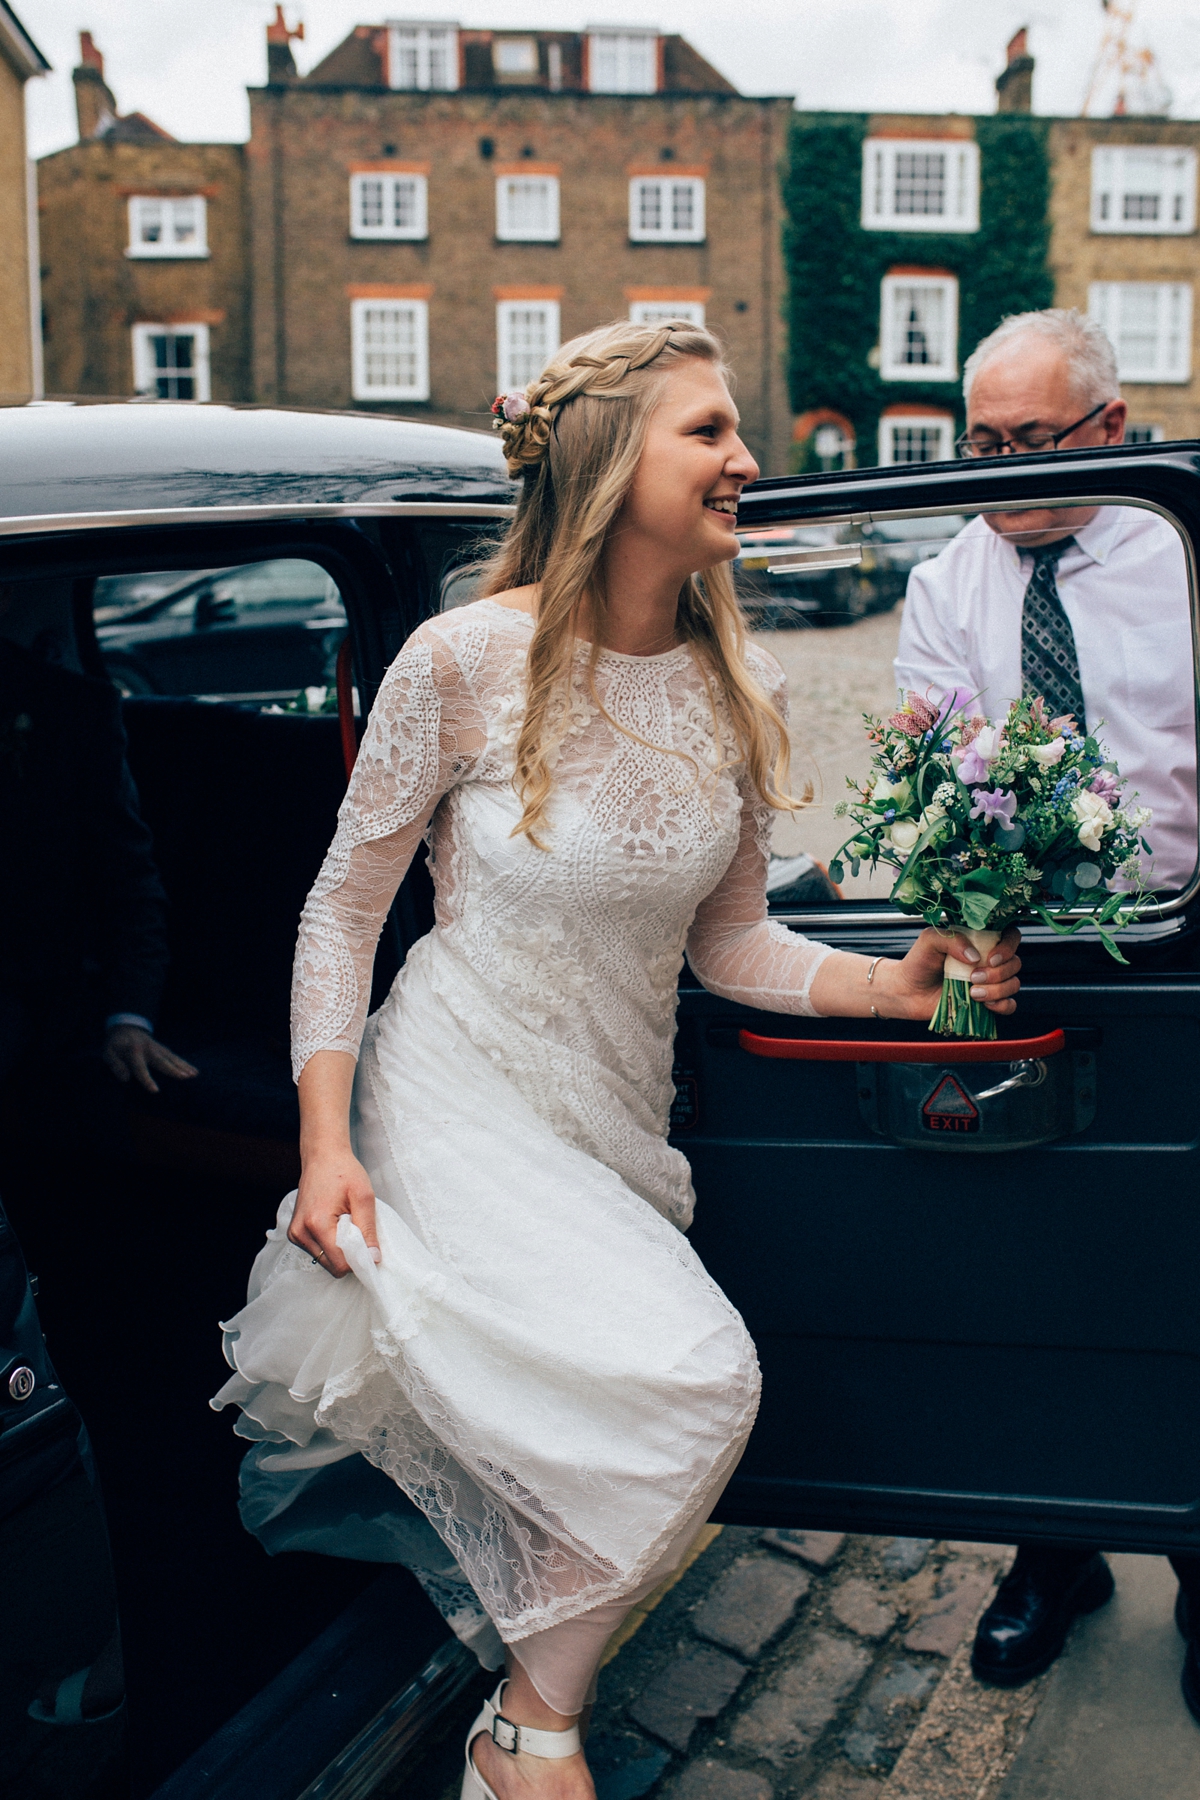 17 A Grace Loves Lace gown for a woodland inspired London pub wedding. Images by Nikki van der Molen